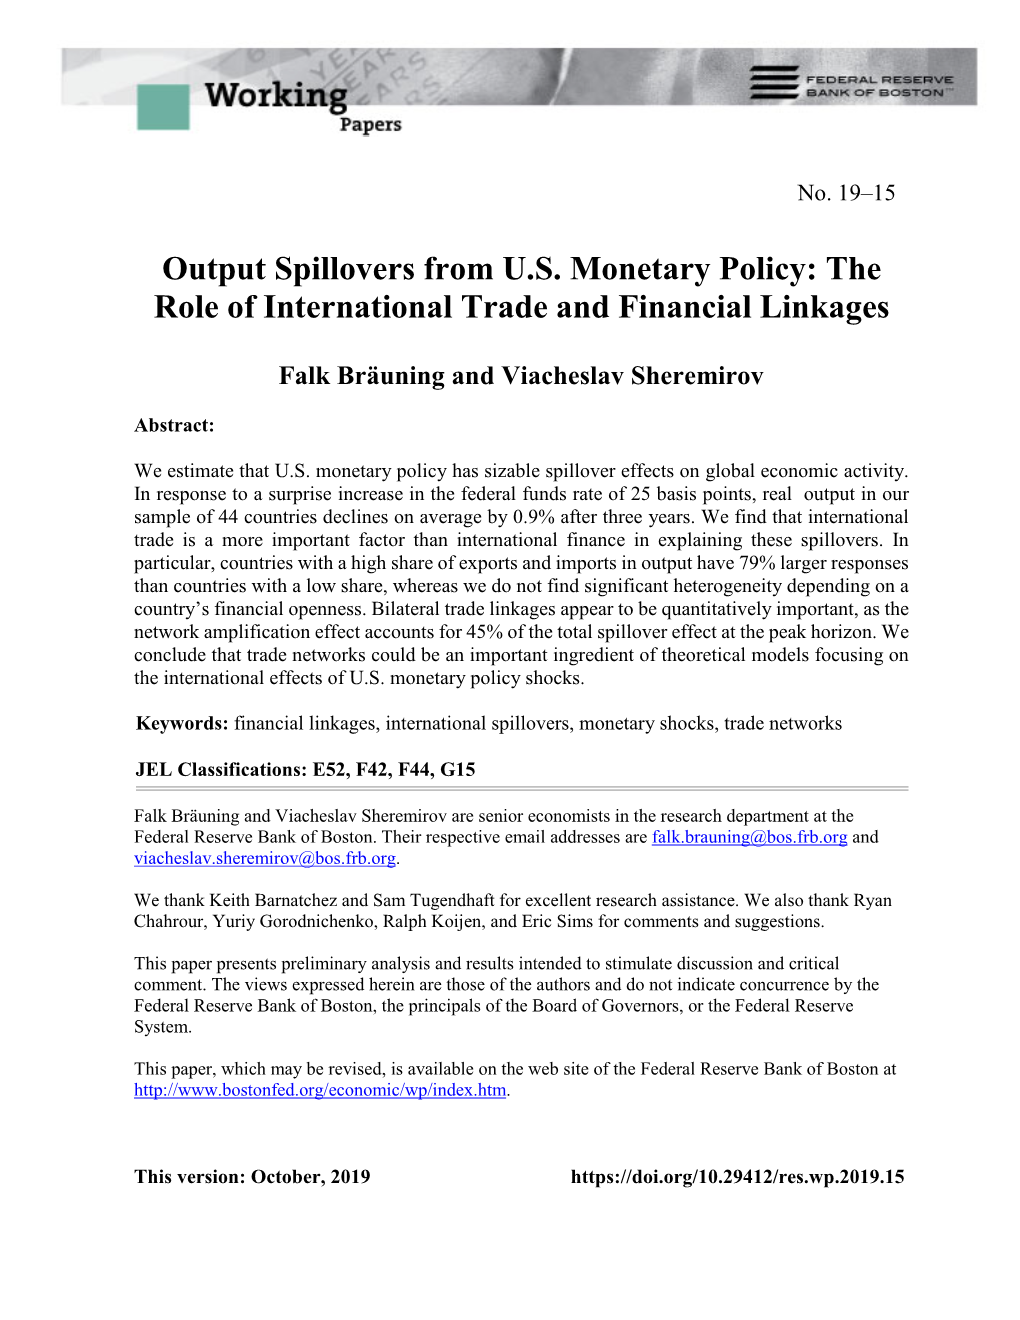 Output Spillovers from US Monetary Policy